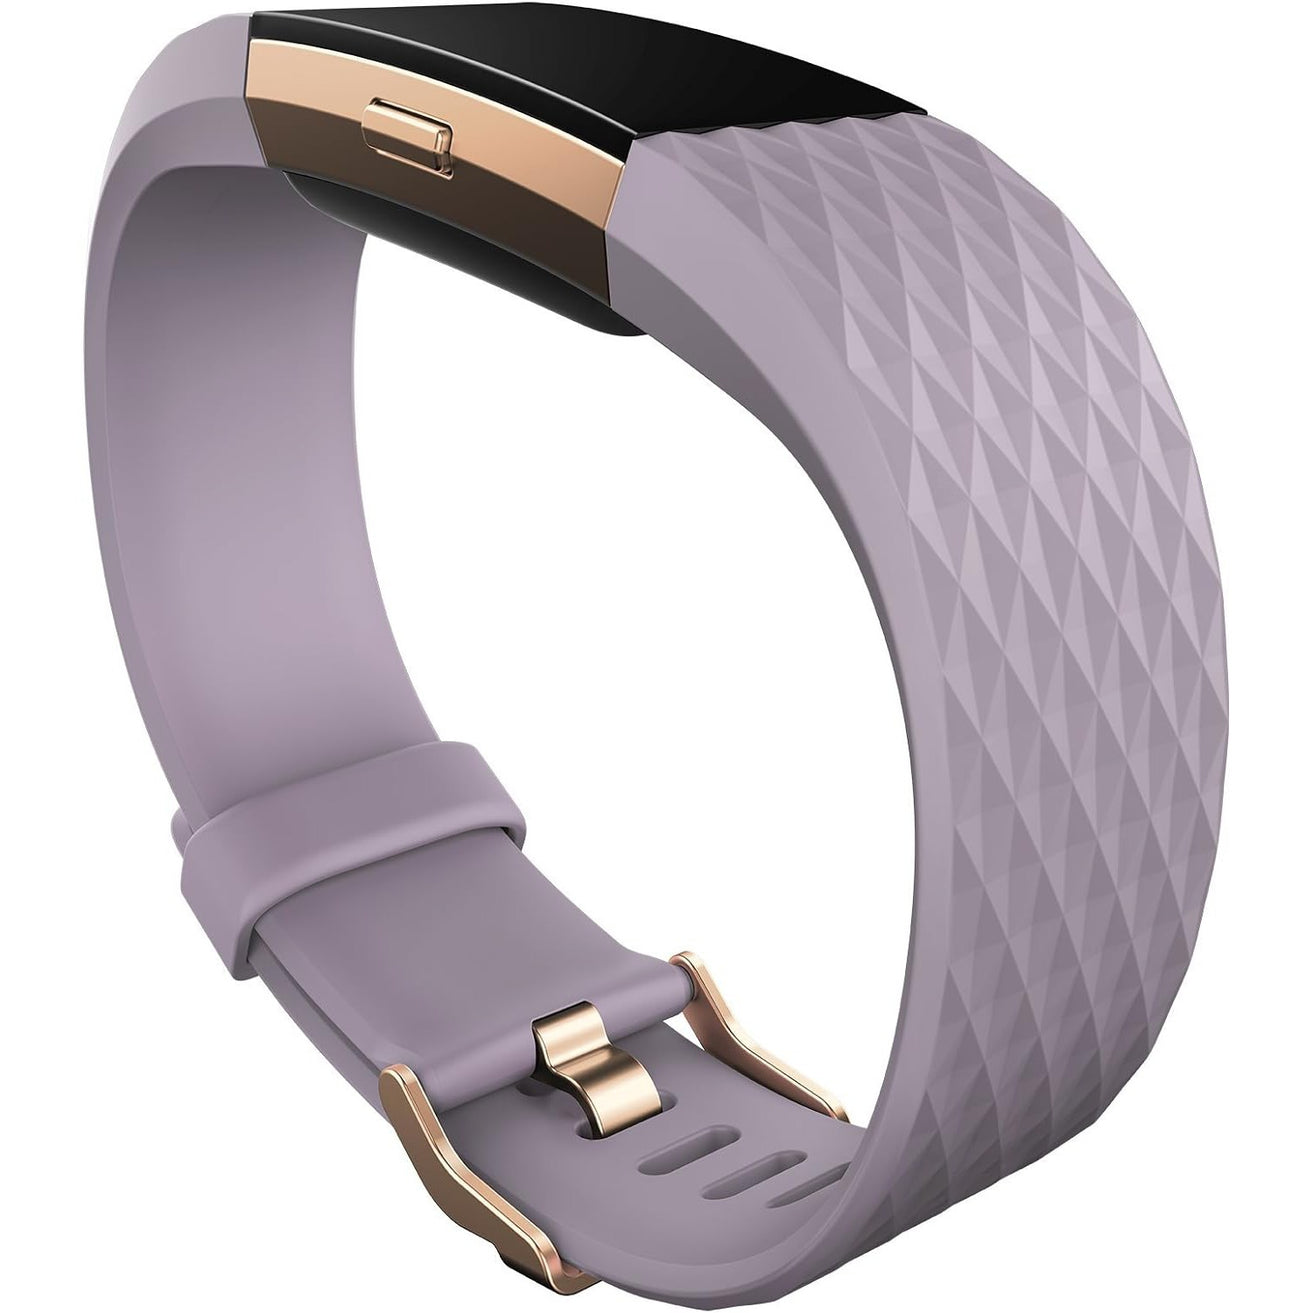 Fitbit Charge 2 Activity Tracker - Lavender Special Edition - Refurbished Good